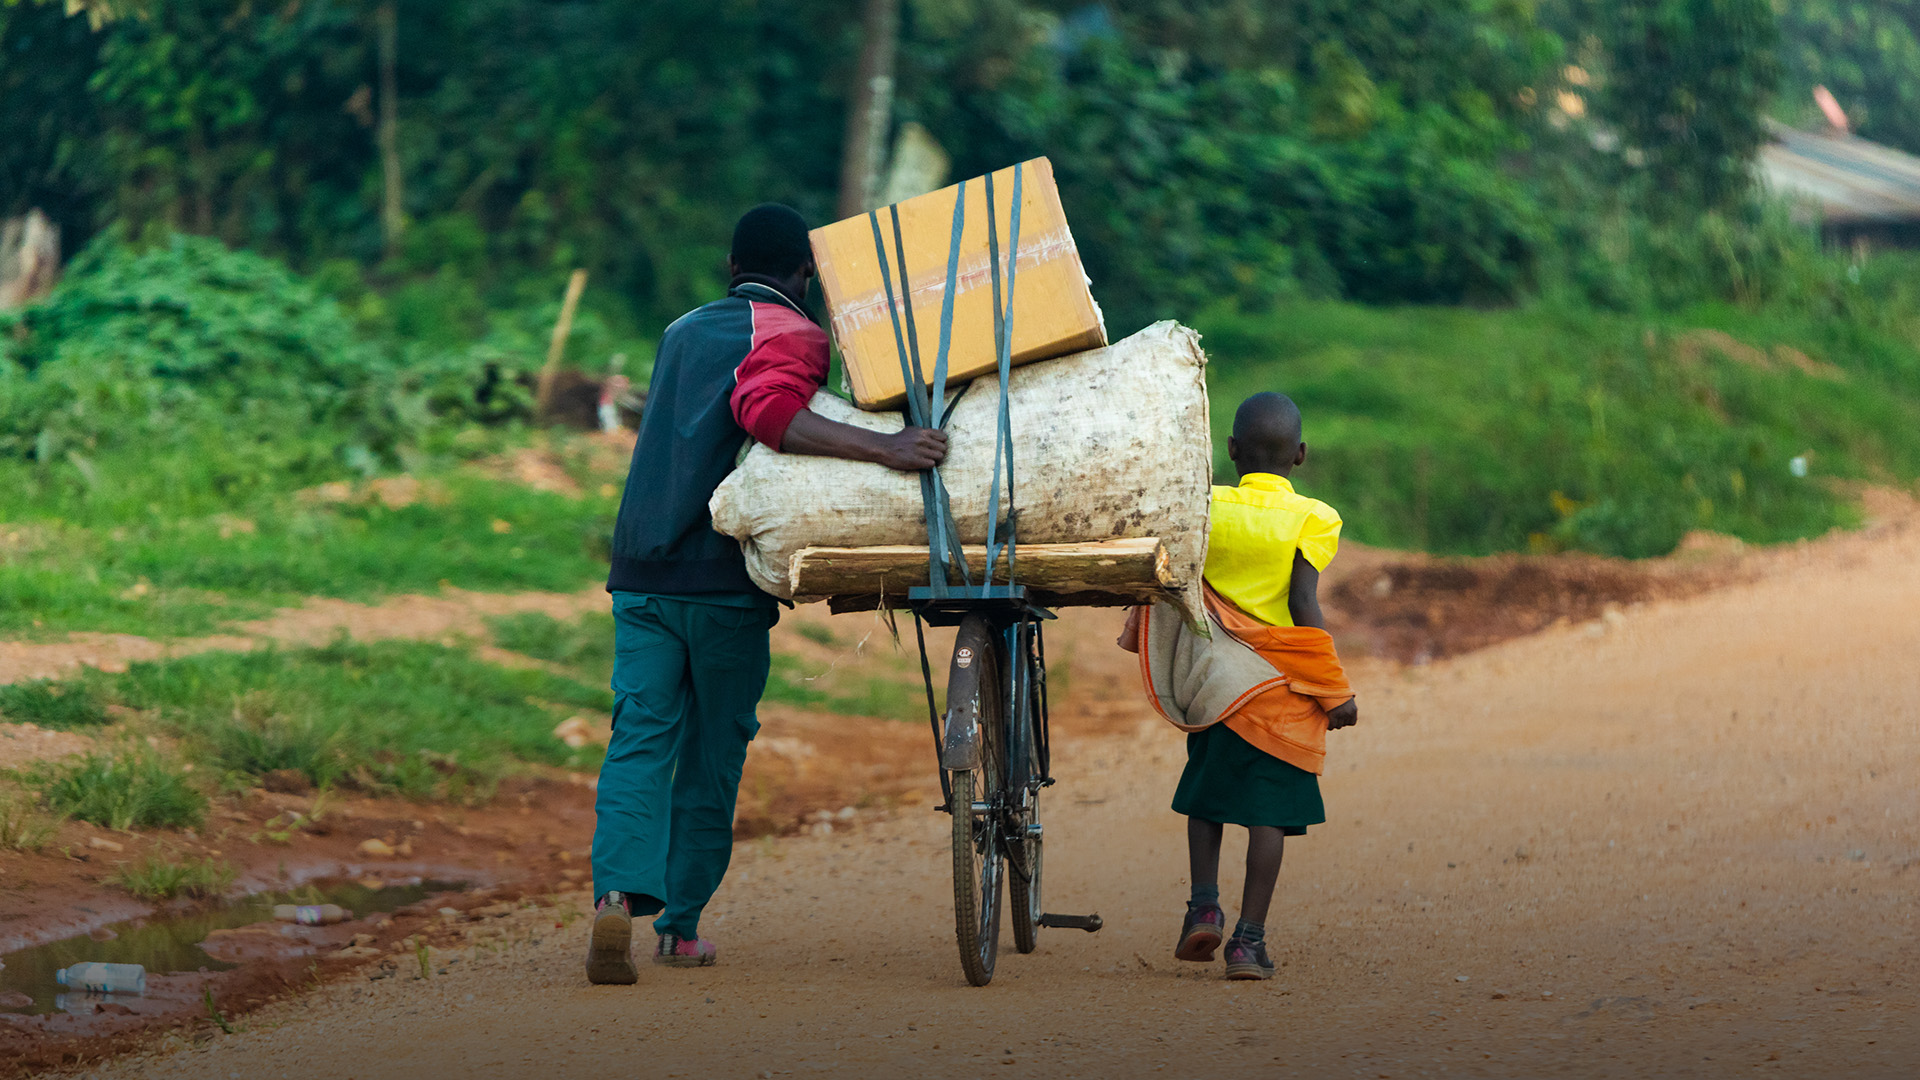 An Ugandan man and a child transporting things with a bicycle